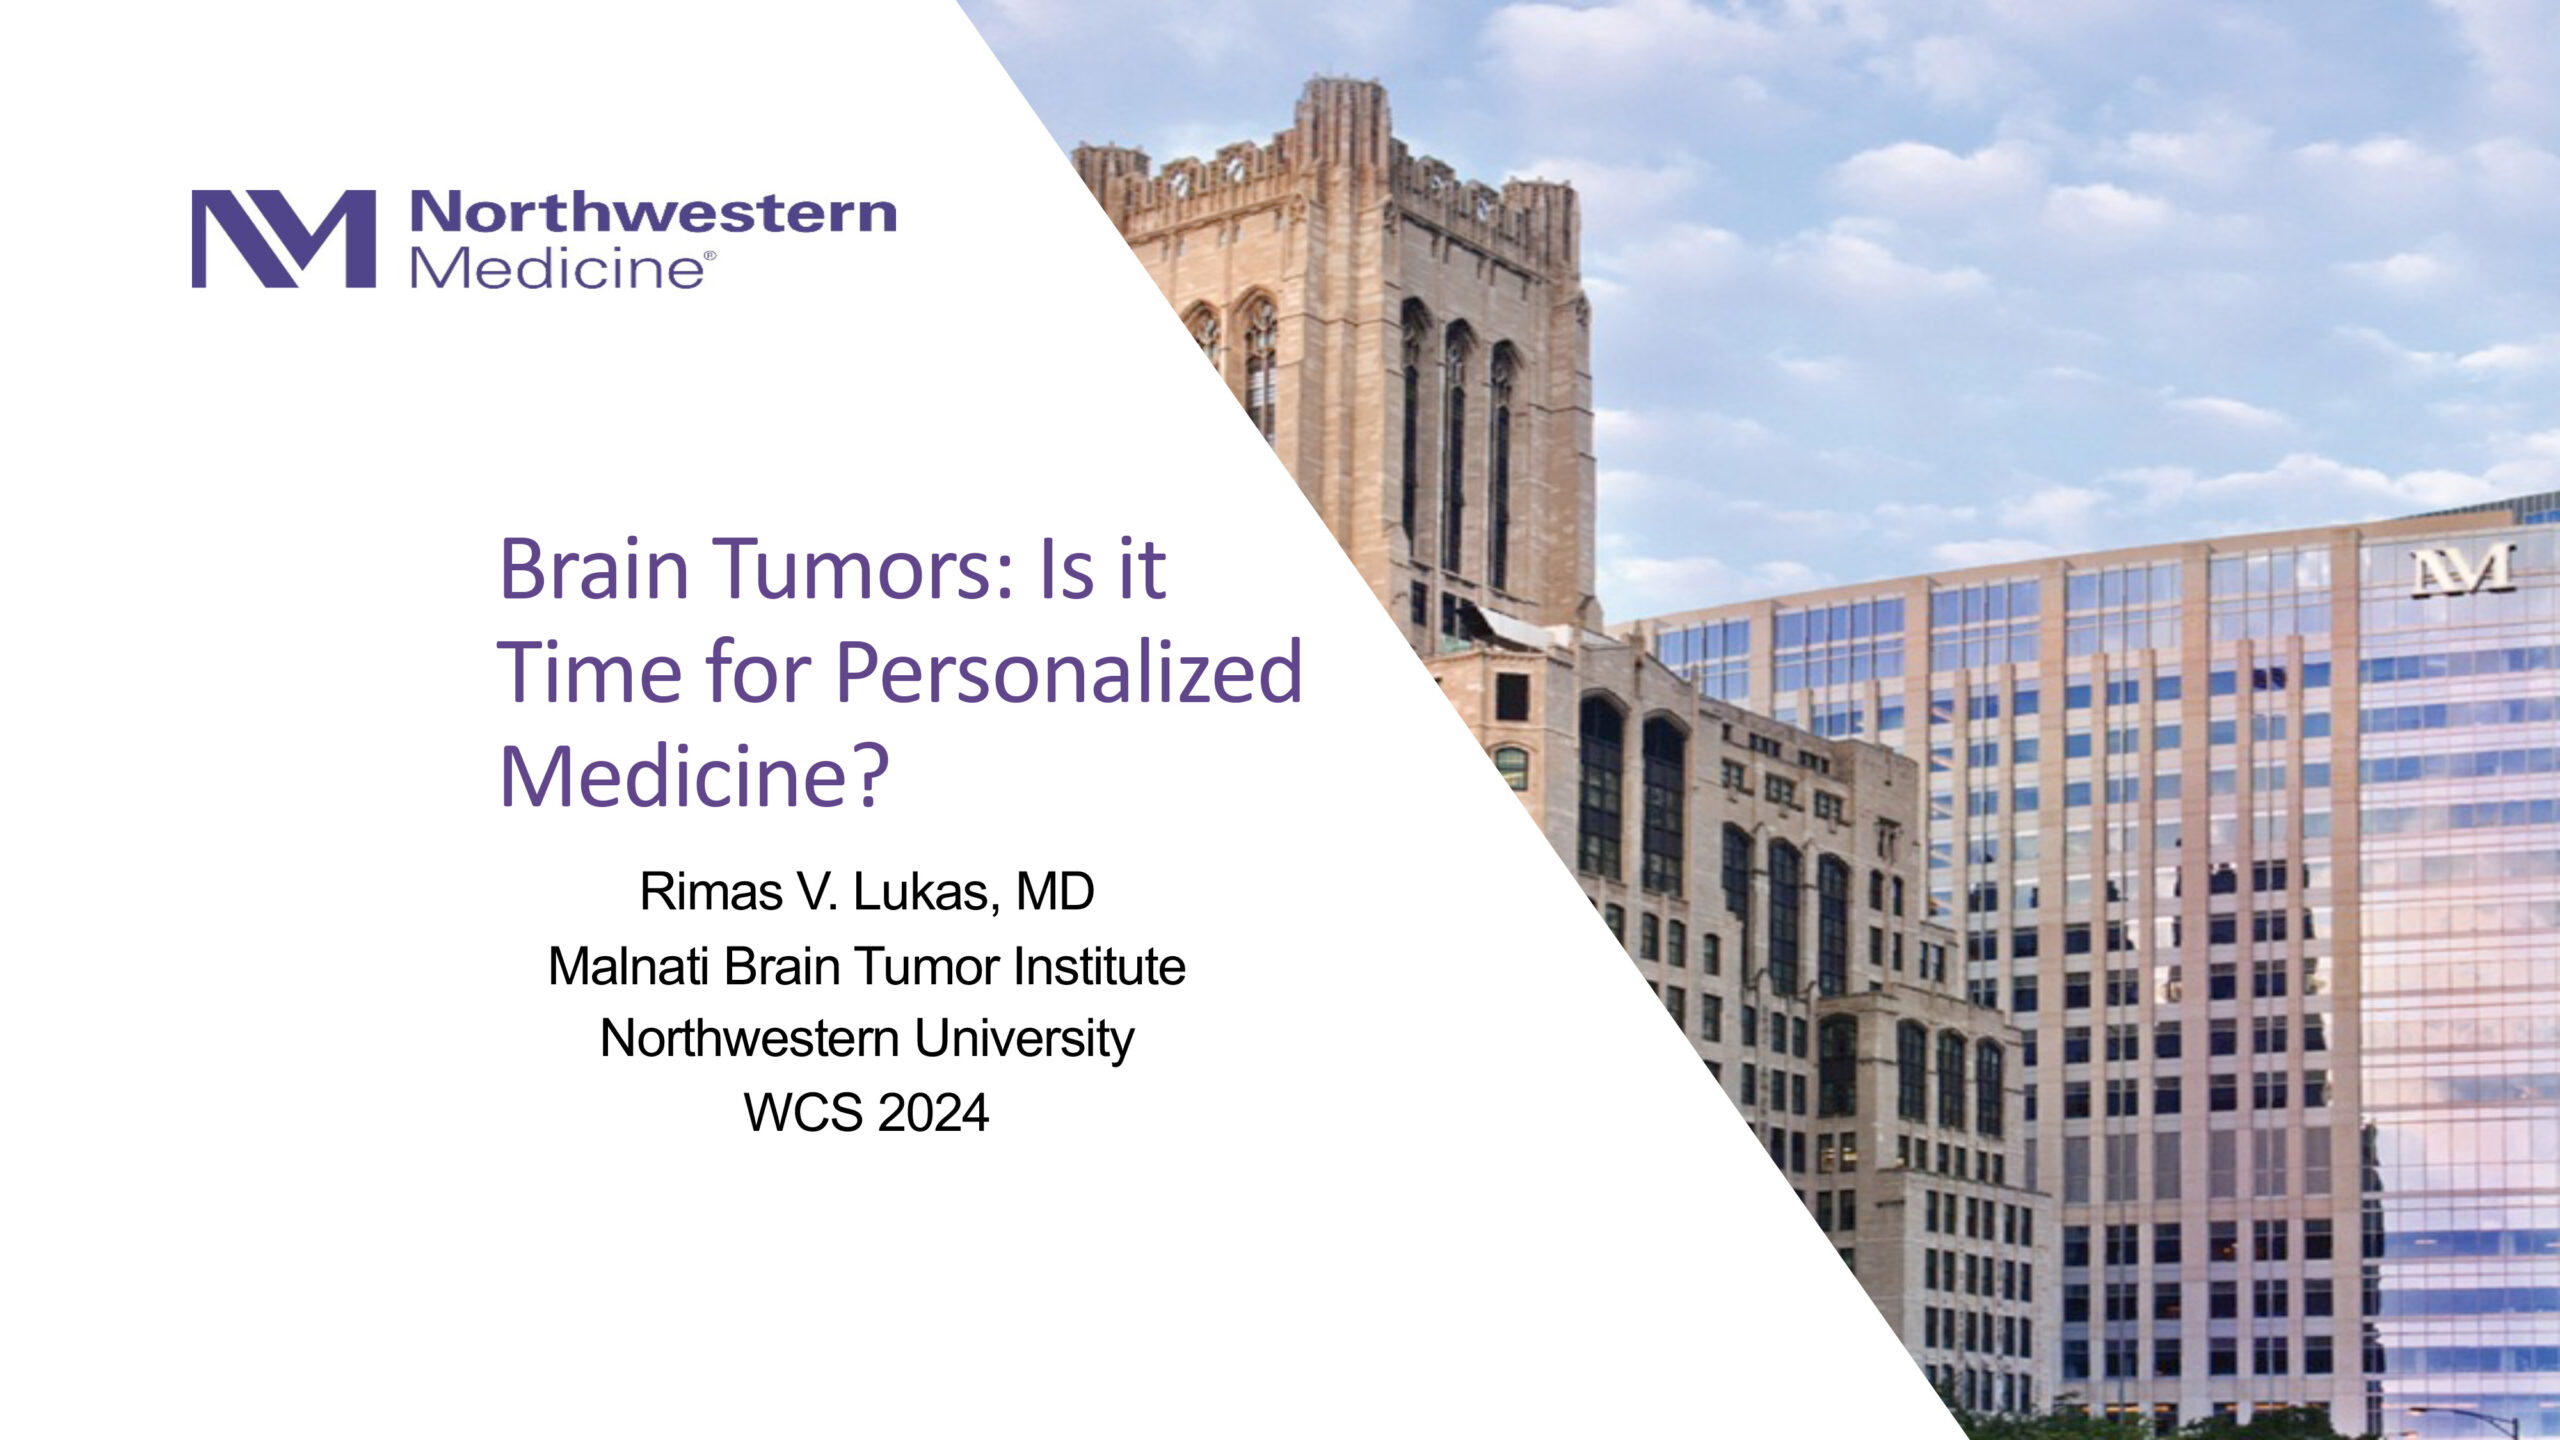 Brain Tumors: Is Time for Personalized Medicine?